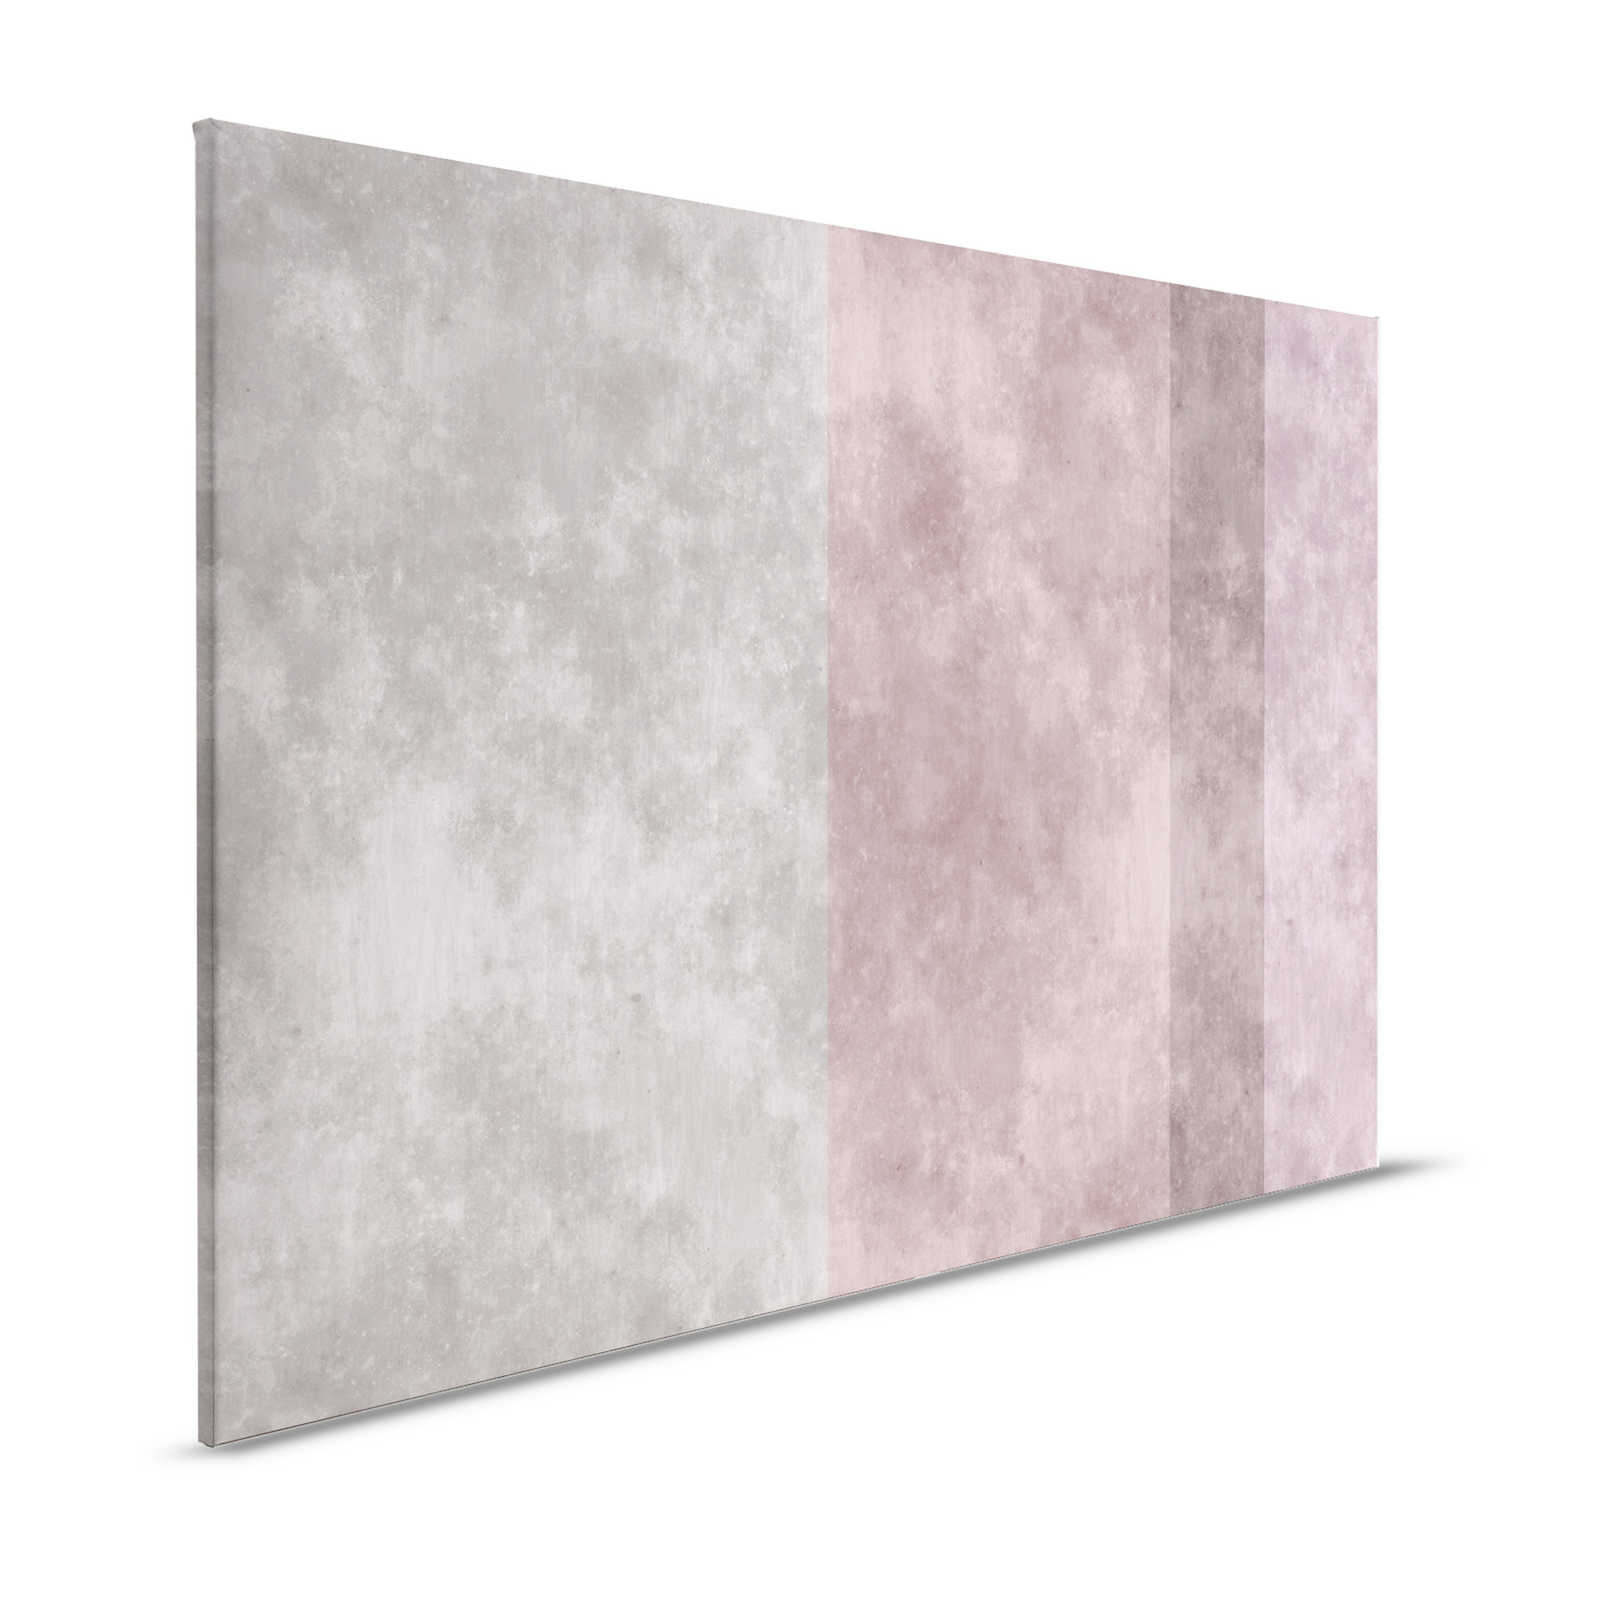 Concrete-look canvas picture with stripes | grey, pink - 1.20 m x 0.80 m
